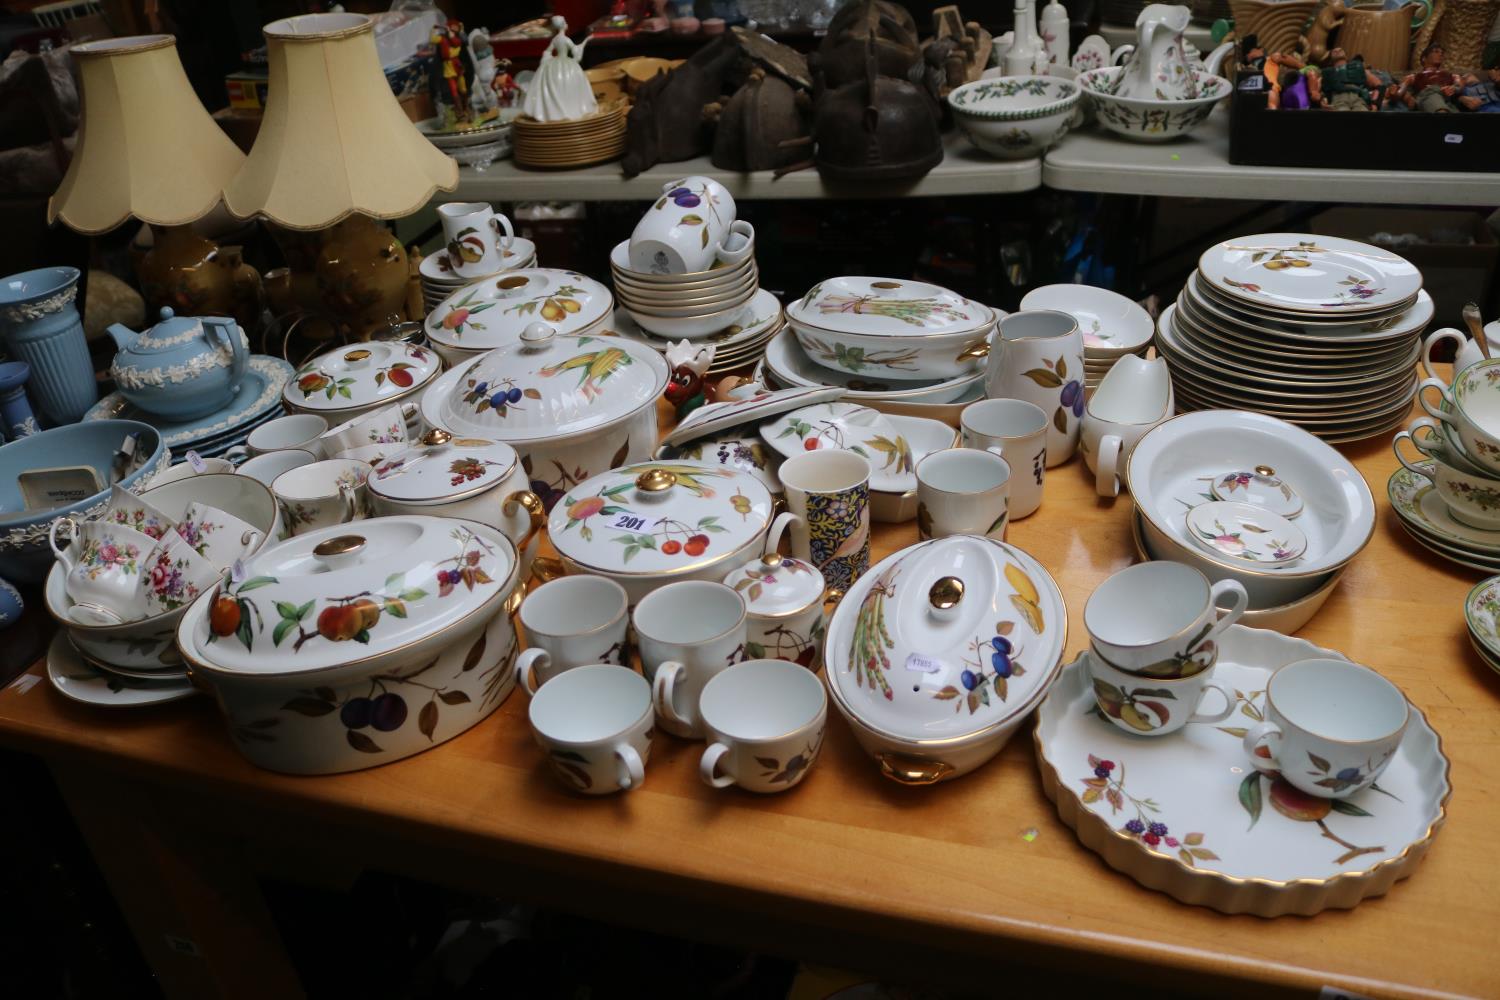 Extensive Royal Worcester Evesham pattern dinner service to include Tureens, Dinner plates,